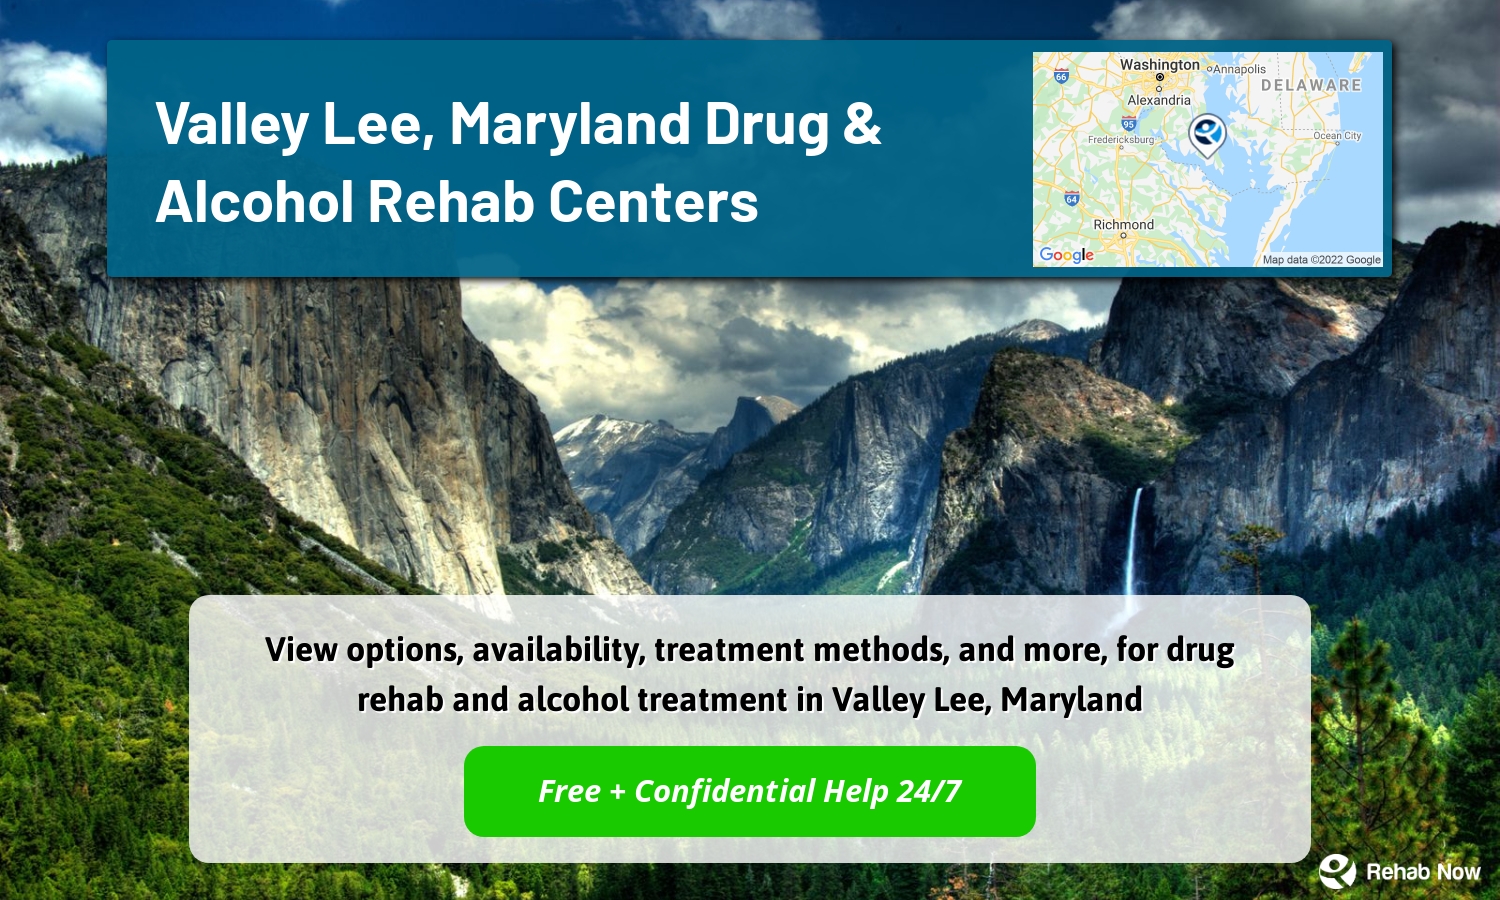 View options, availability, treatment methods, and more, for drug rehab and alcohol treatment in Valley Lee, Maryland